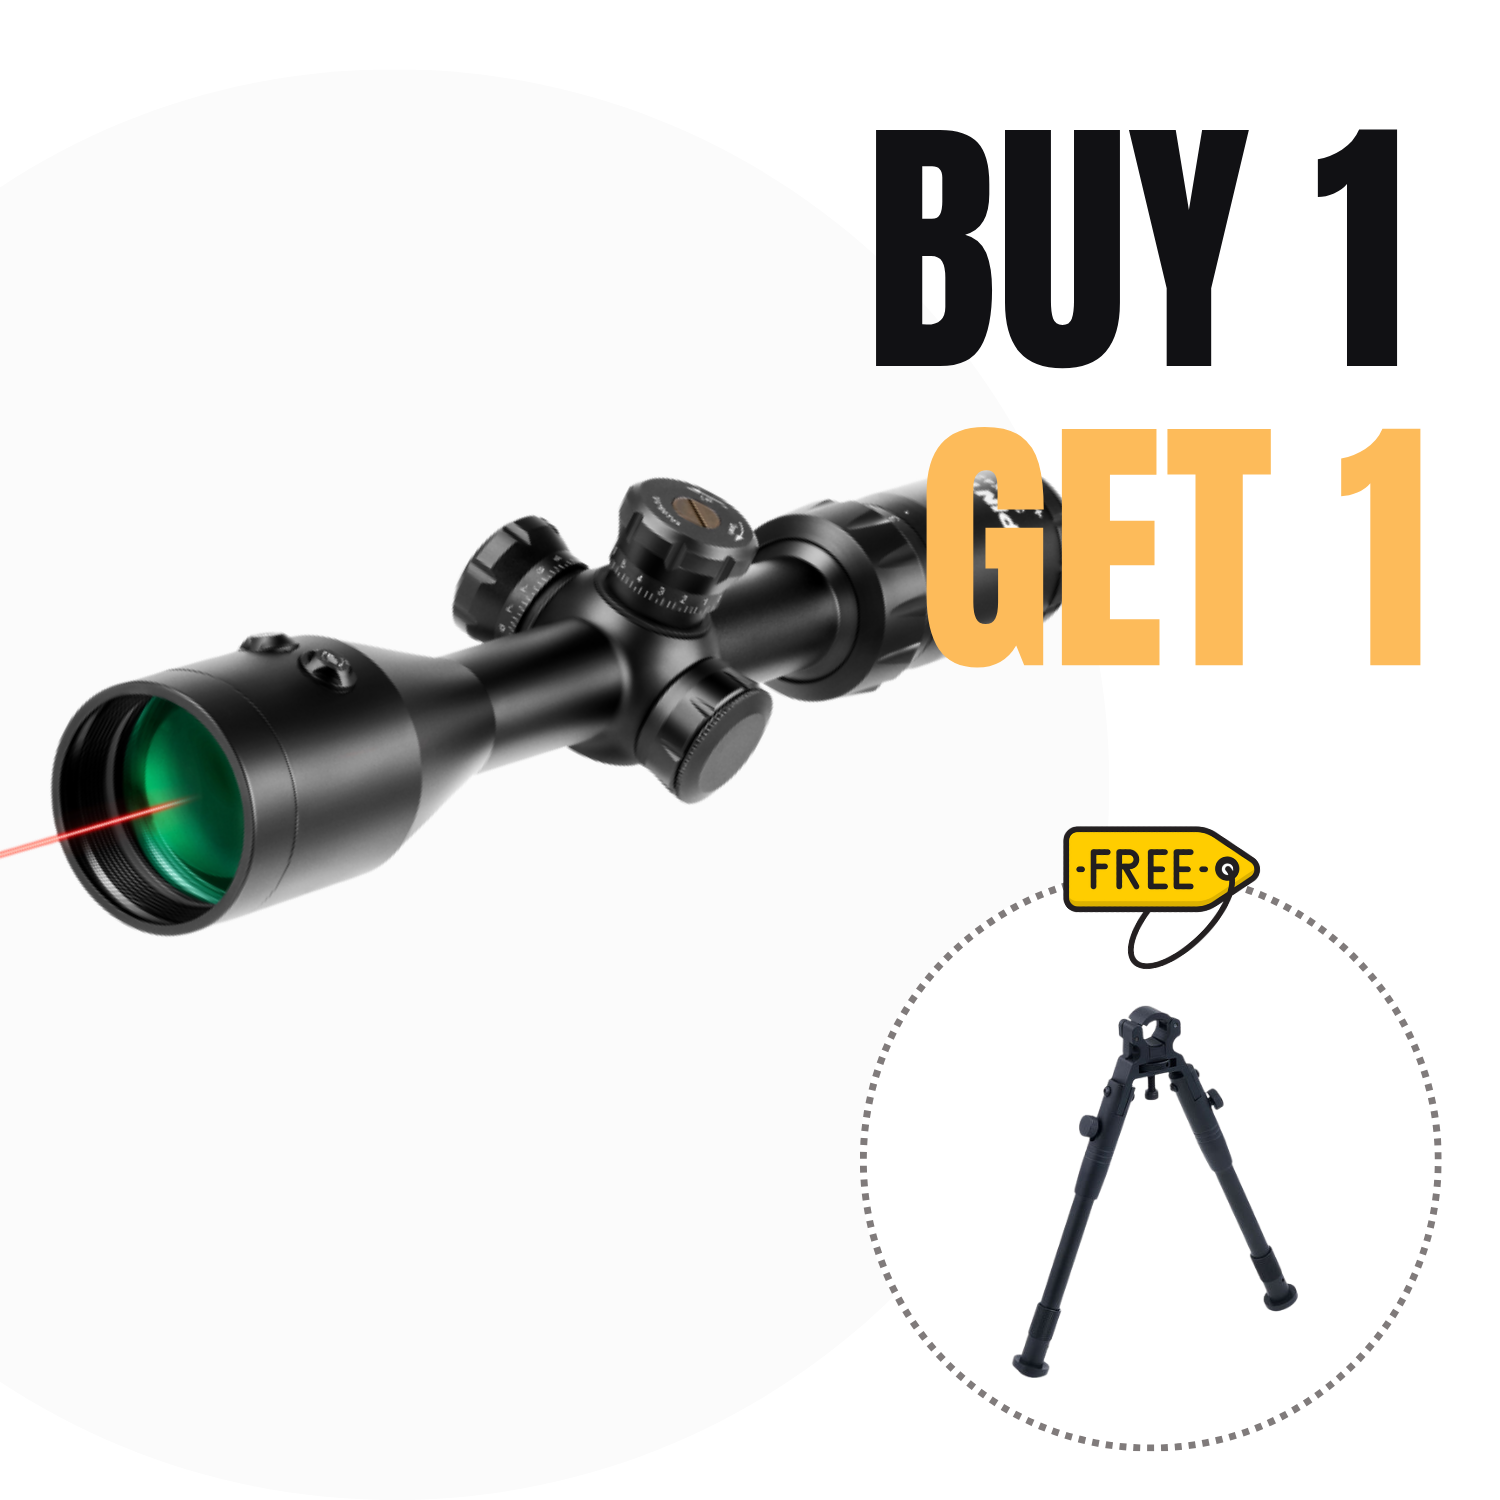 【BUY 1 GET 1 FREE】3-9x42 Mil Dot Tactical Hunting Rifle Scope with Laser and Reticle Adjustment & Multicoated Green Lens